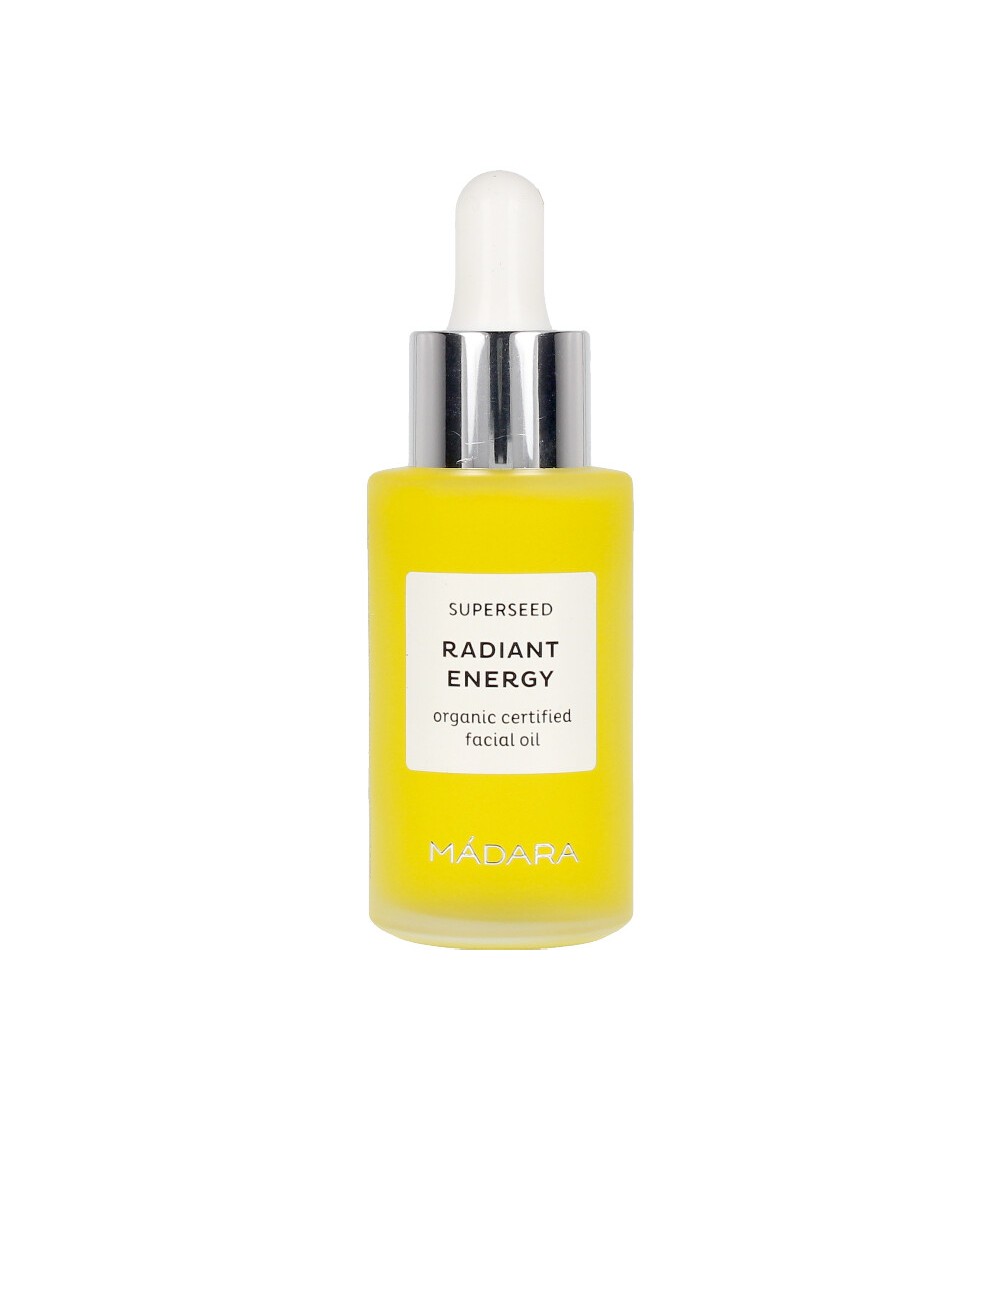 SUPERSEED radiant energy organic facial oil 30 ml